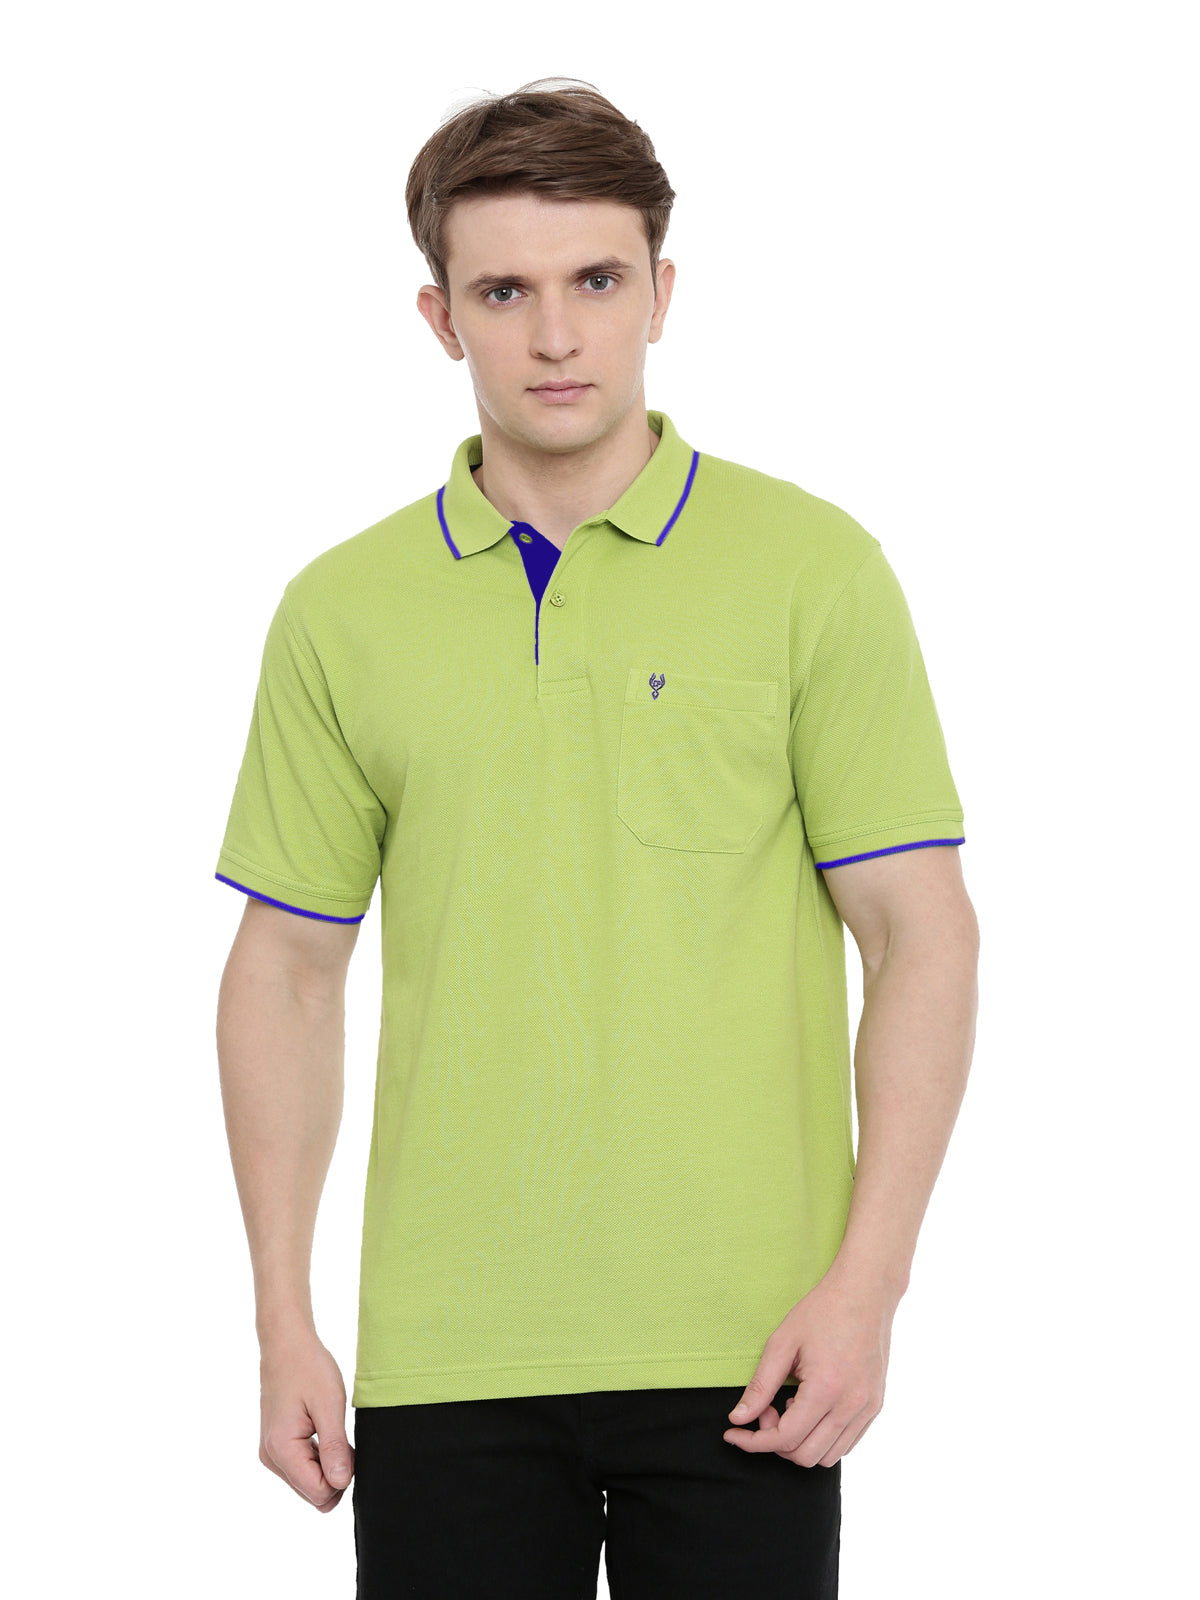 Classic Polo Men's Bright Green Polo Authentic Fit T-Shirt | 4SSN 207